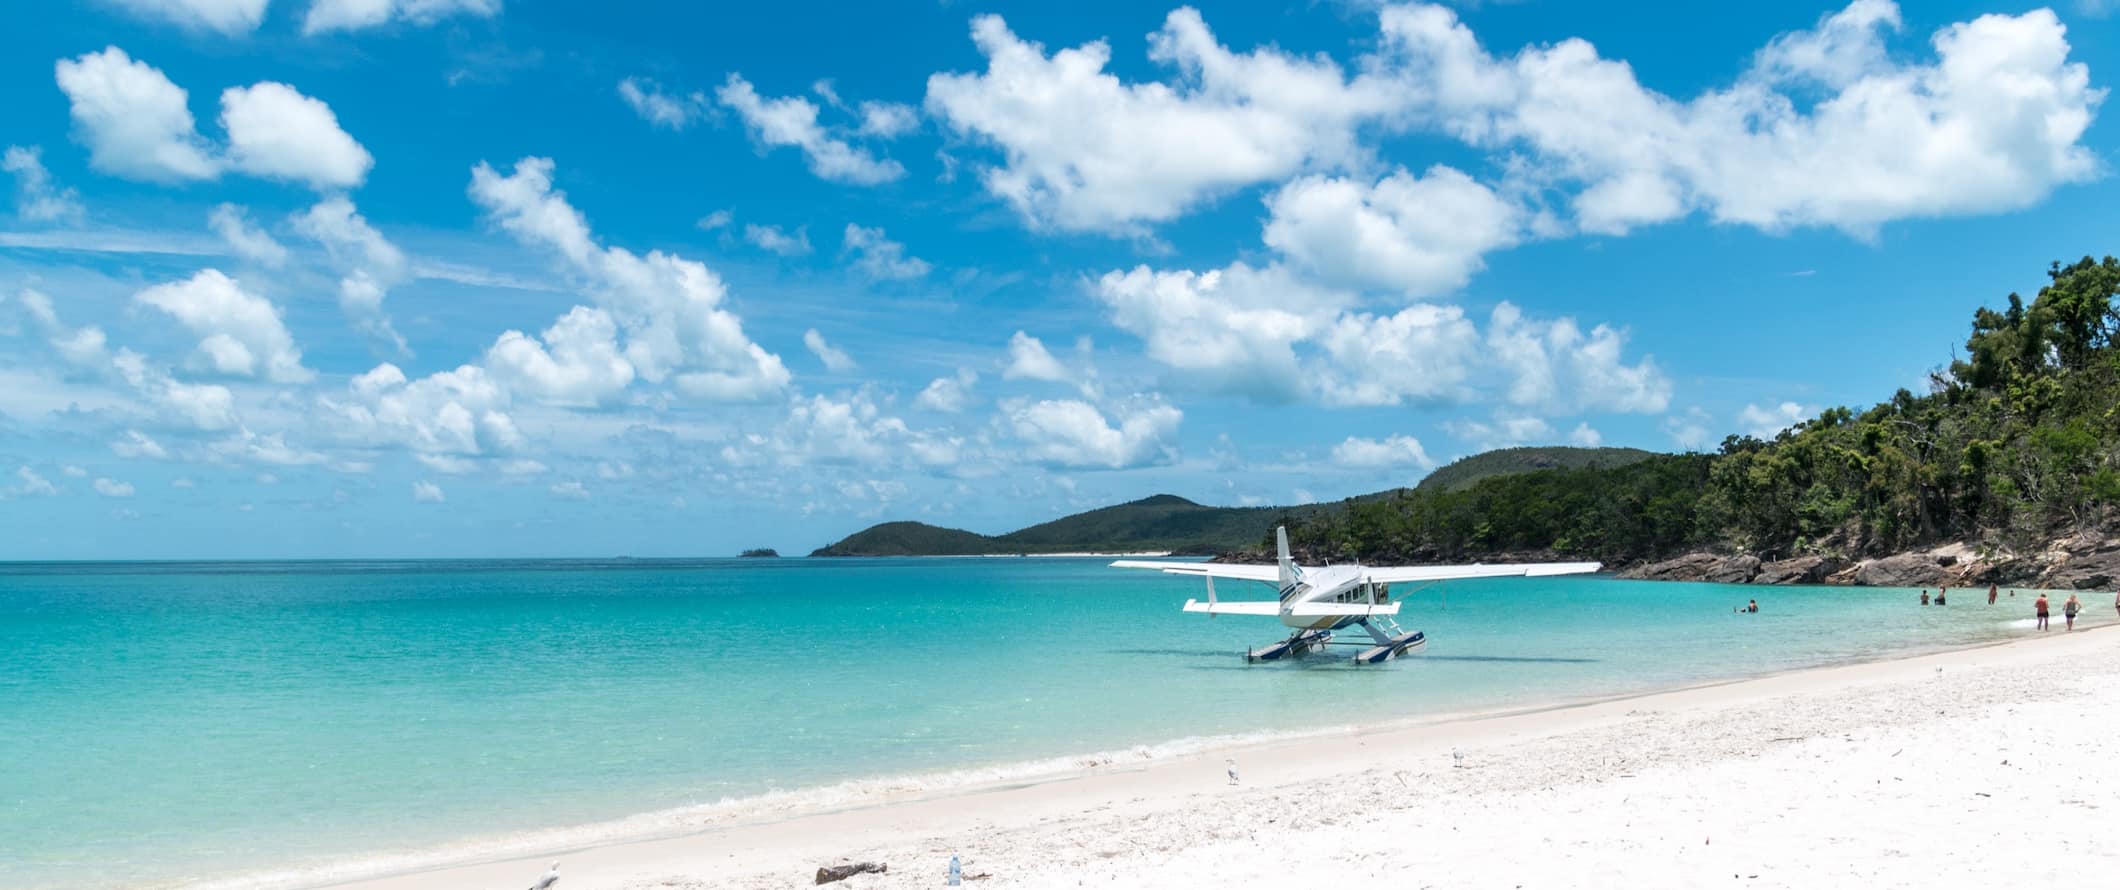 A plane on the water of the stunning Whitsunday Islands in Australia